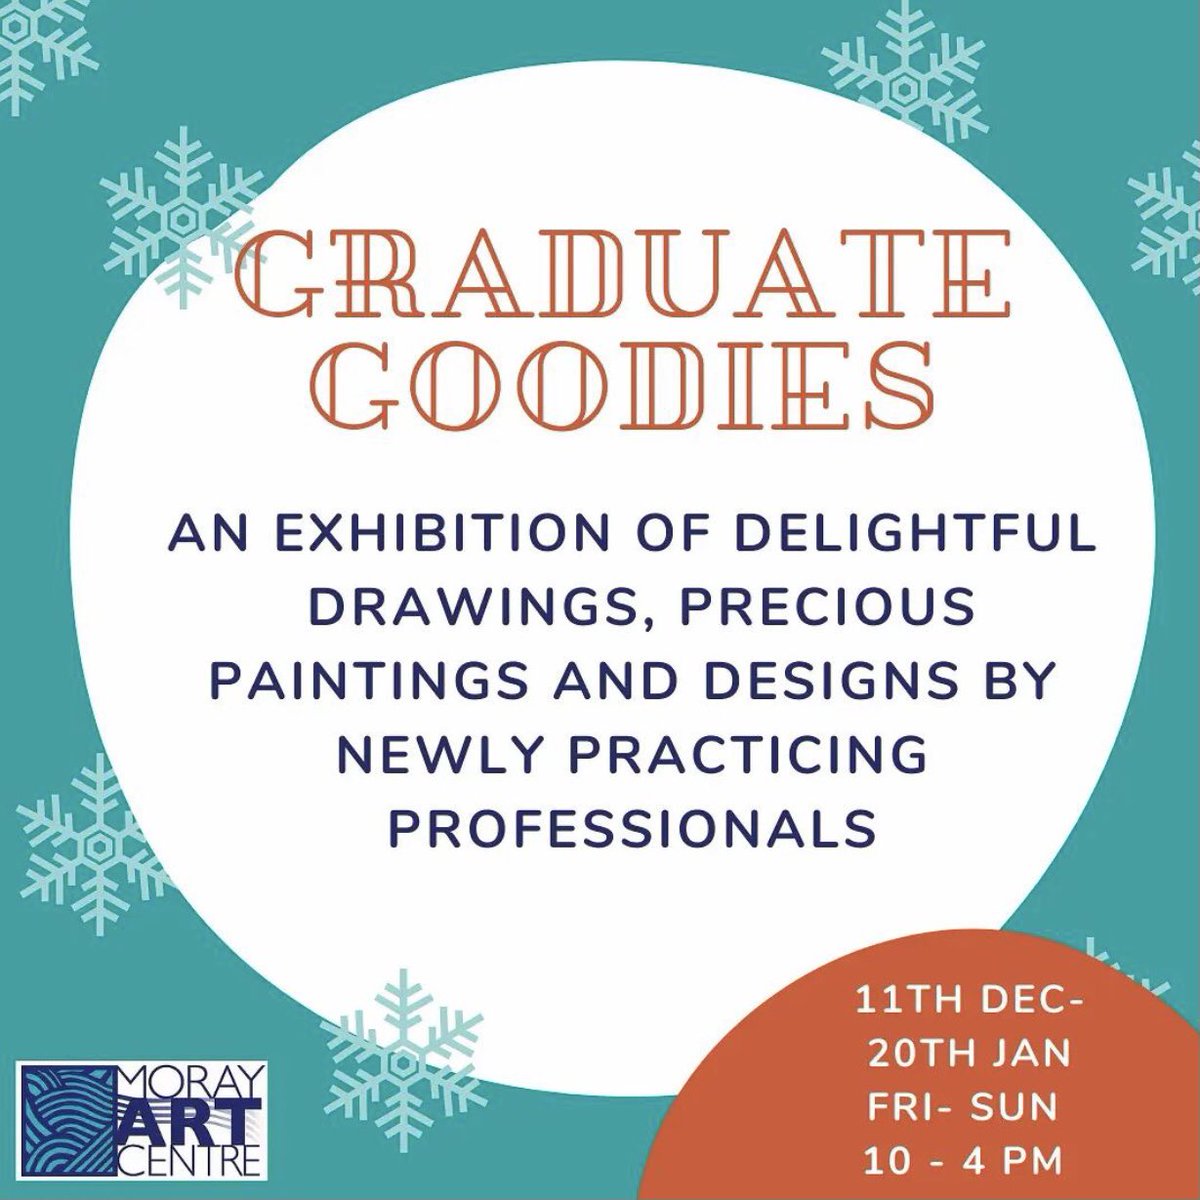 Thrilled to be a part of @MorayArtCentre’s Graduate Goodies exhibition ❤️ The exhibition is on until the 20th January 2022, and is open Friday-Sunday 10-4pm ⭐️ The centre closes on the 20th December for the holidays and reopens on the 7th January. Don’t miss out!